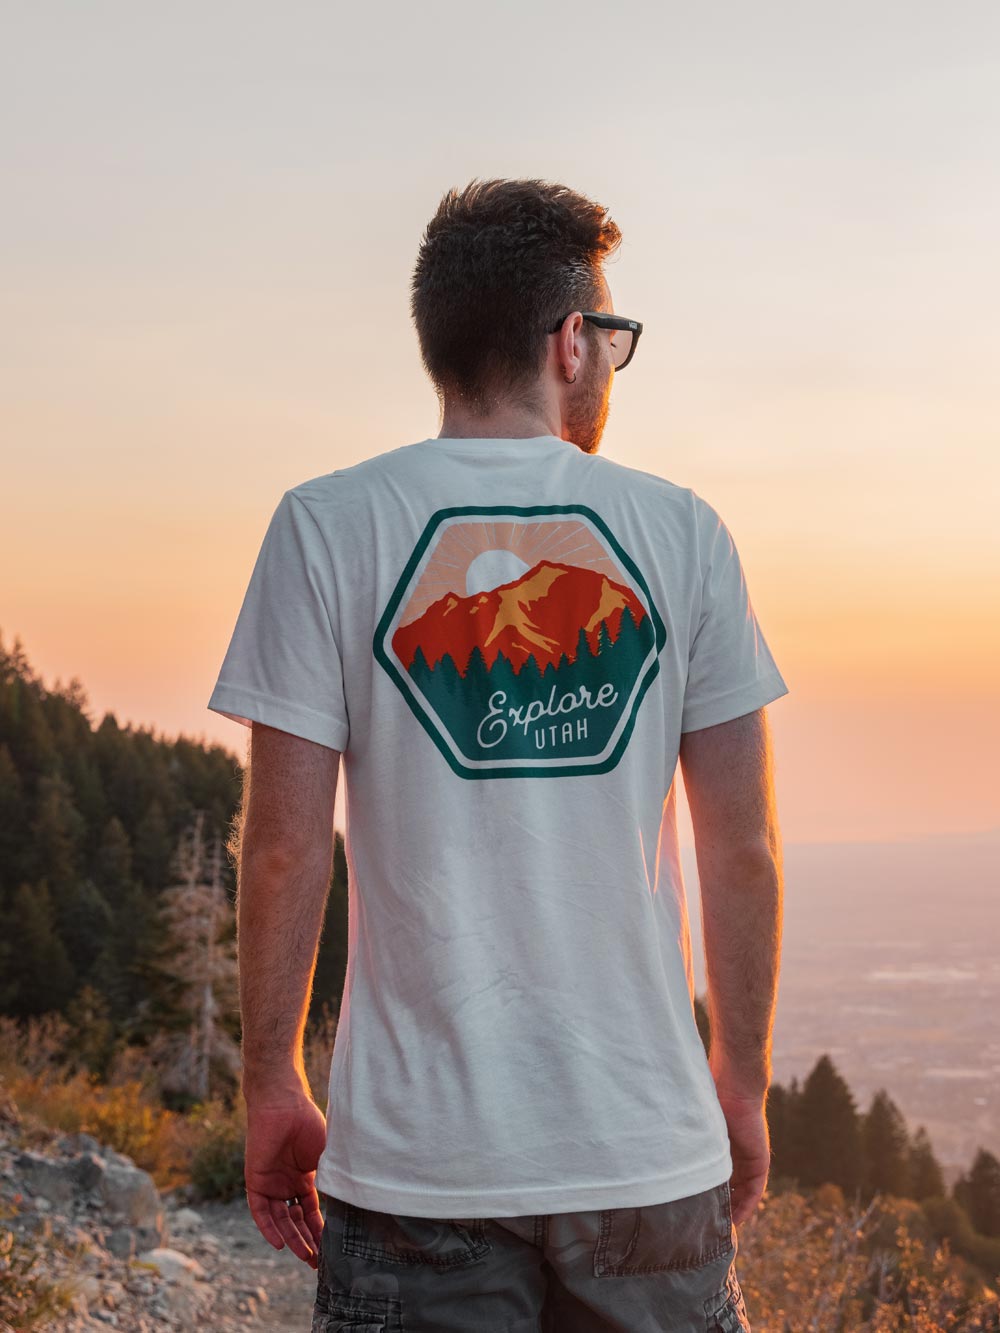 El Manor Ave Co-Founder Chase Charaba facing away from the camera and toward the sunset while showing off the white Explore Utah t-shirt.